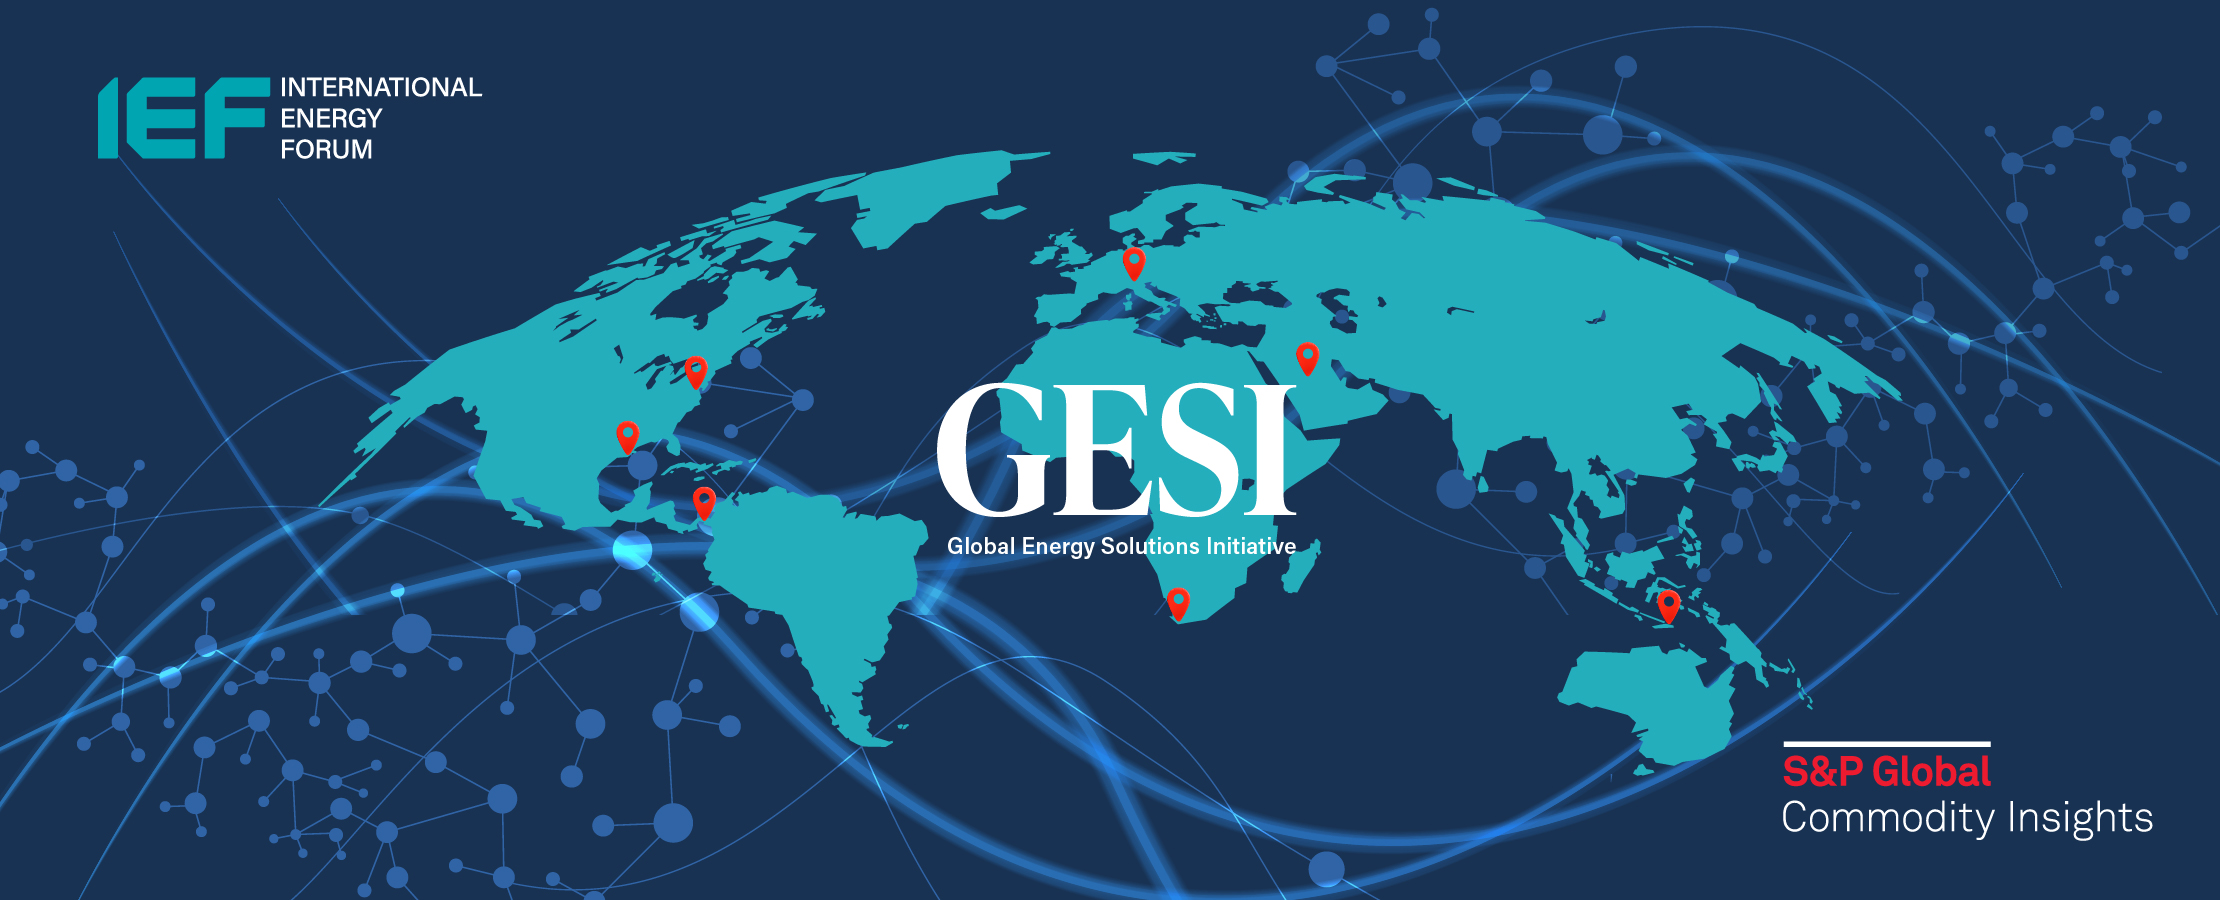 Global Energy Solutions Initiative